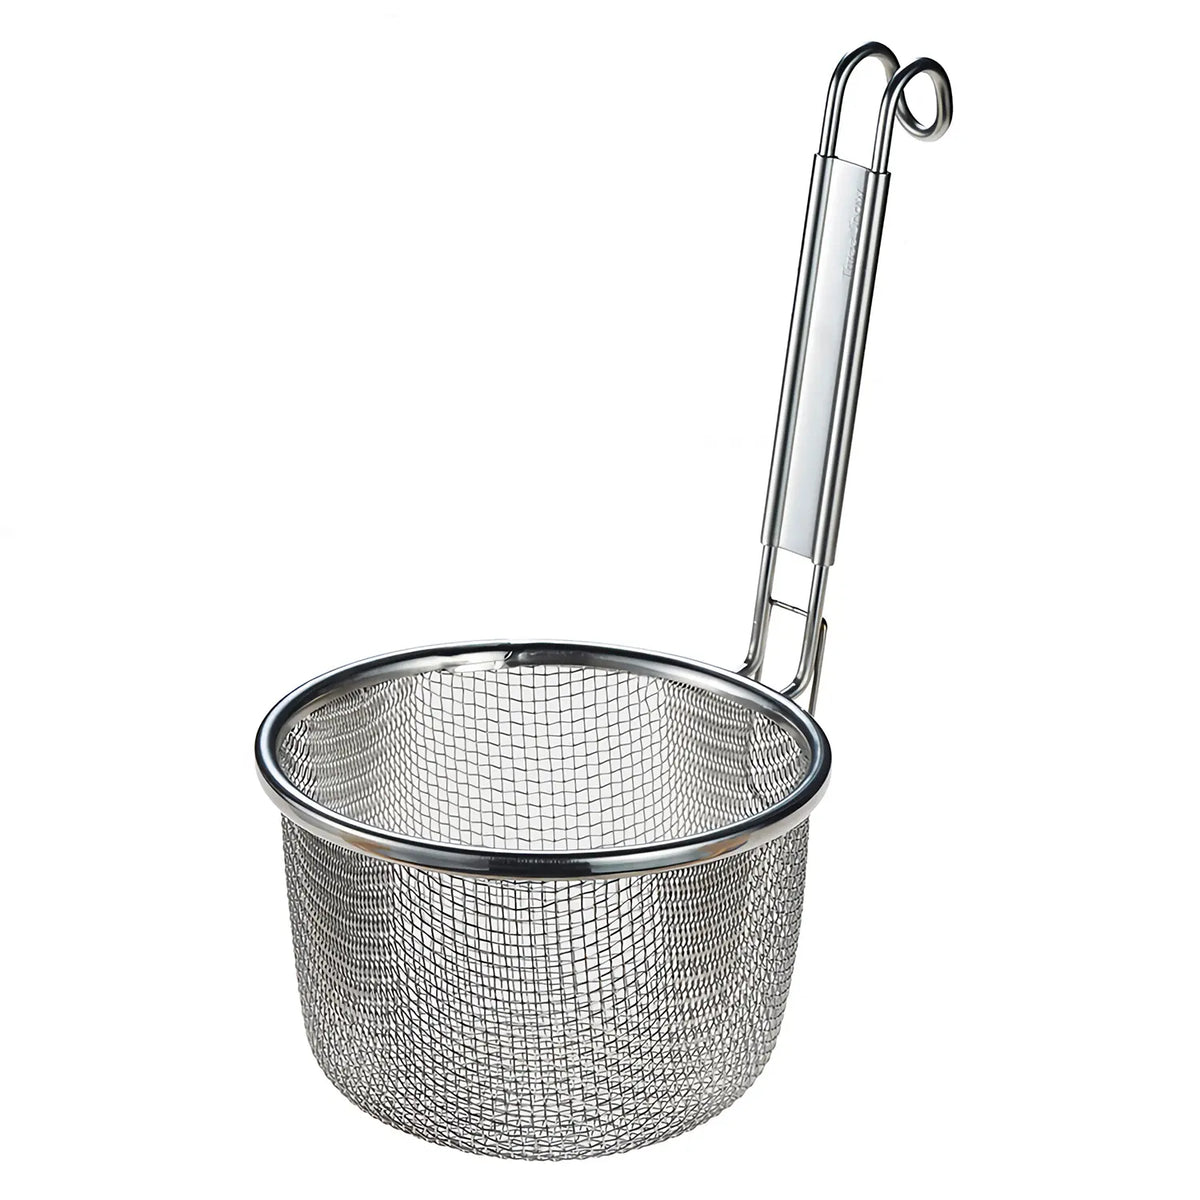 Three Snow Stainless Steel Ramen Tebo Noodle Strainer for Household Use